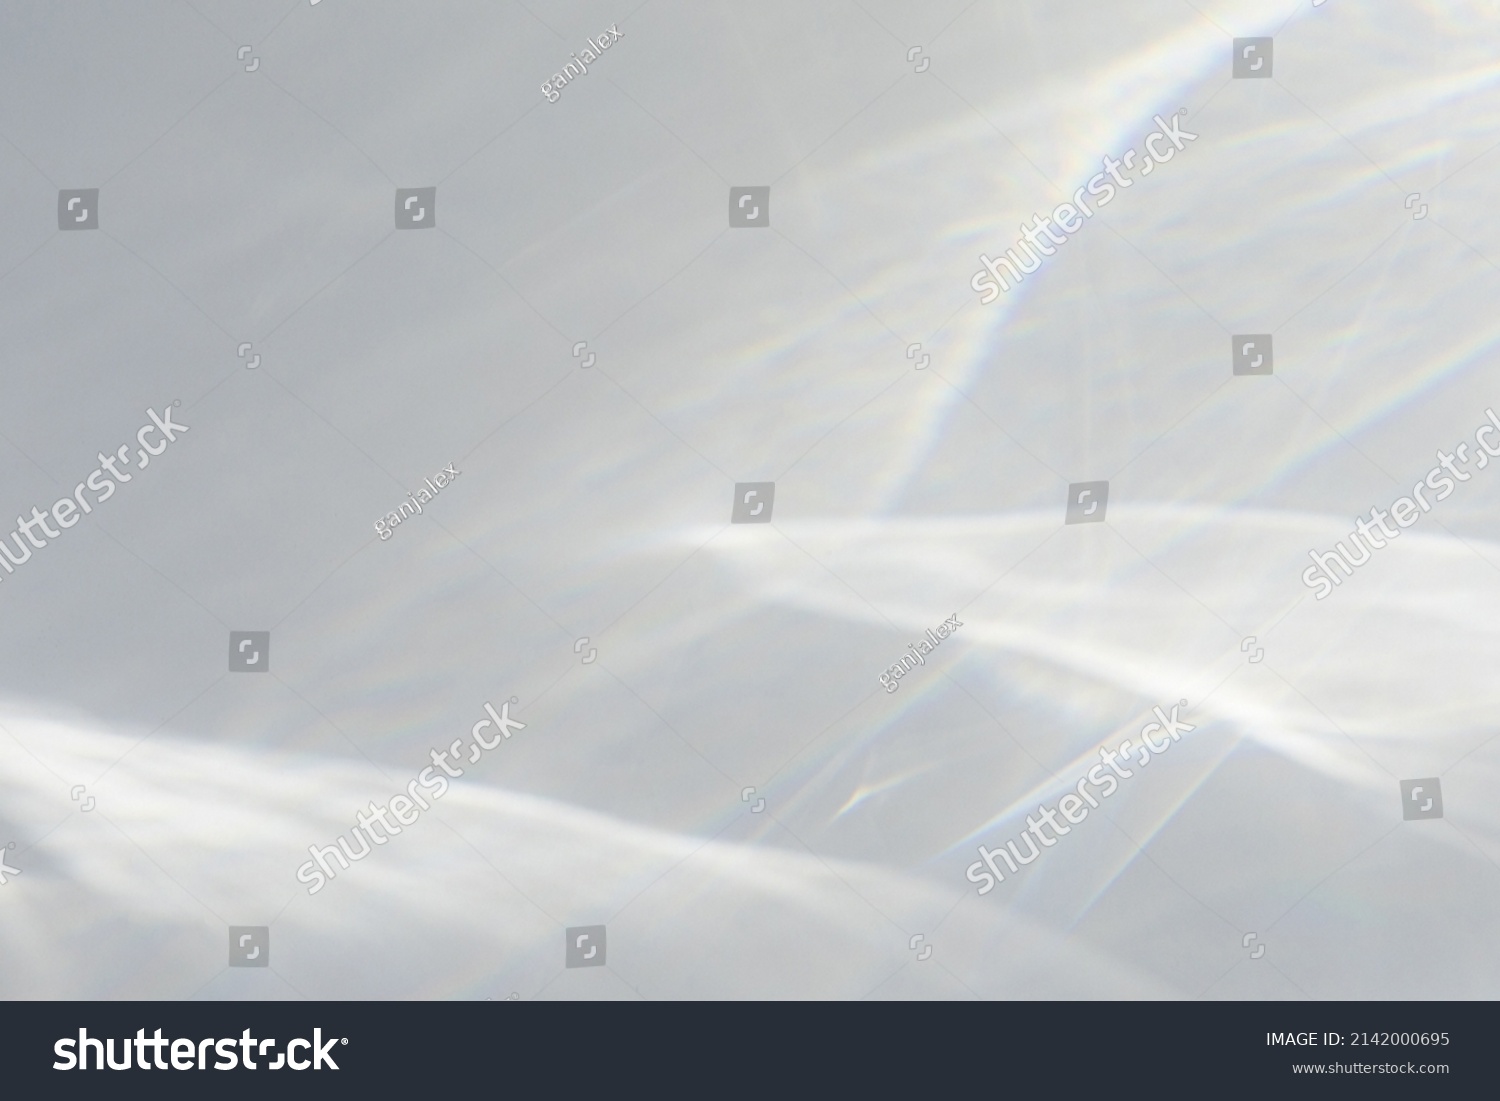 Blurred water texture overlay effect for photo and mockups. Organic drop diagonal shadow caustic effect with rainbow refraction of light on a white wall. Shadows for natural light effects #2142000695